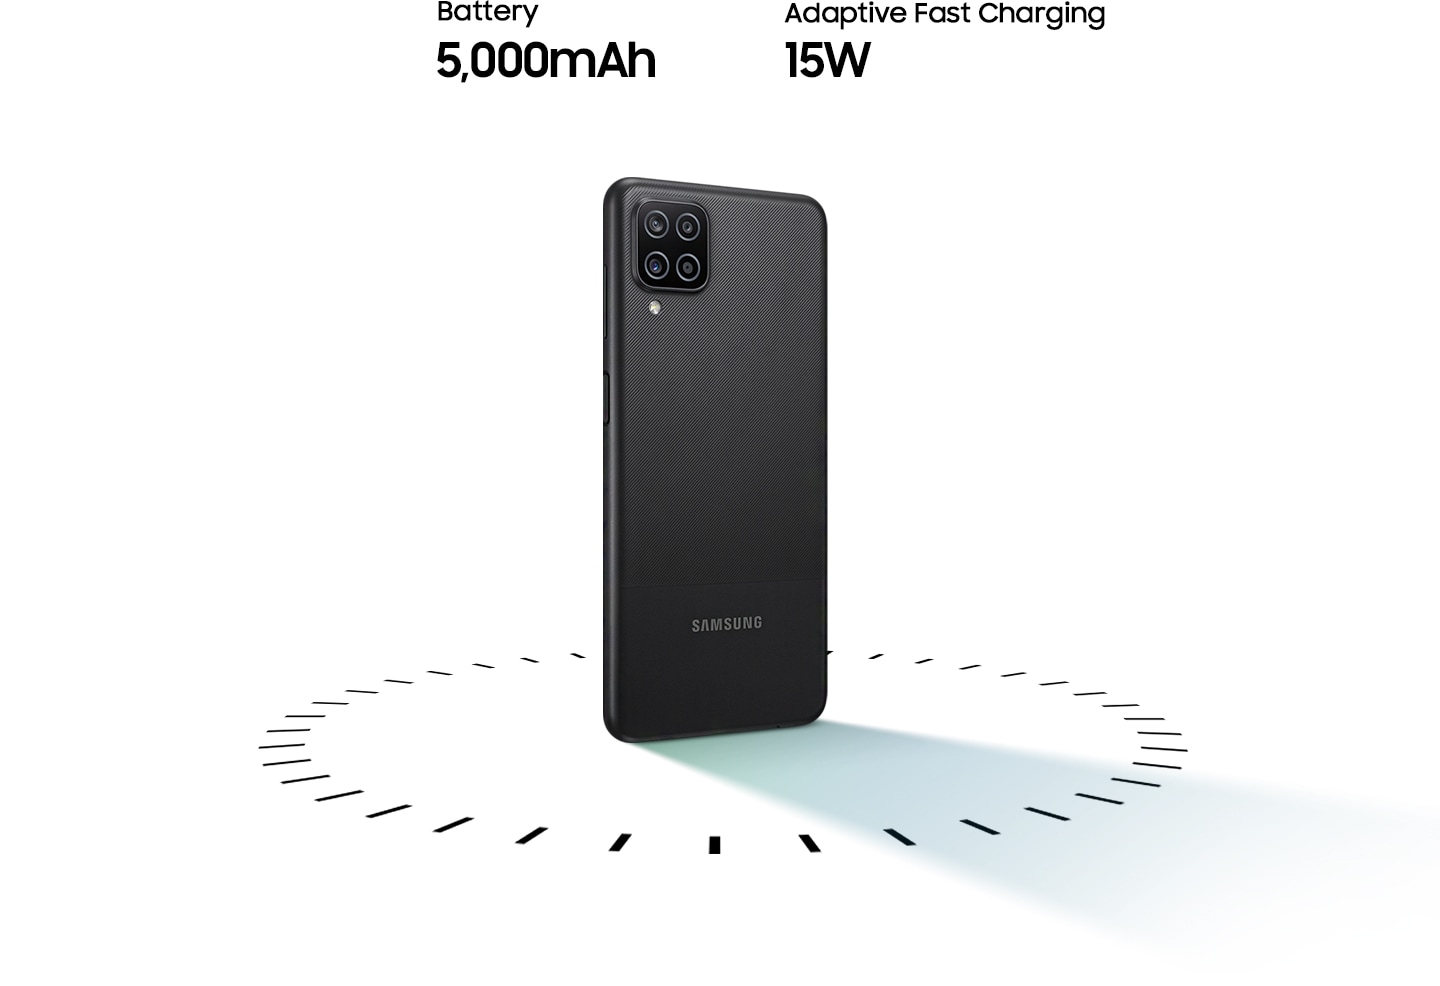 Read the user review on Samsung Galaxy A12 battery specs. Samsung Galaxy A12 stands up, surrounded by circular dots, with the text of 5,000mAh Battery and 15W Adaptive Fast charging.